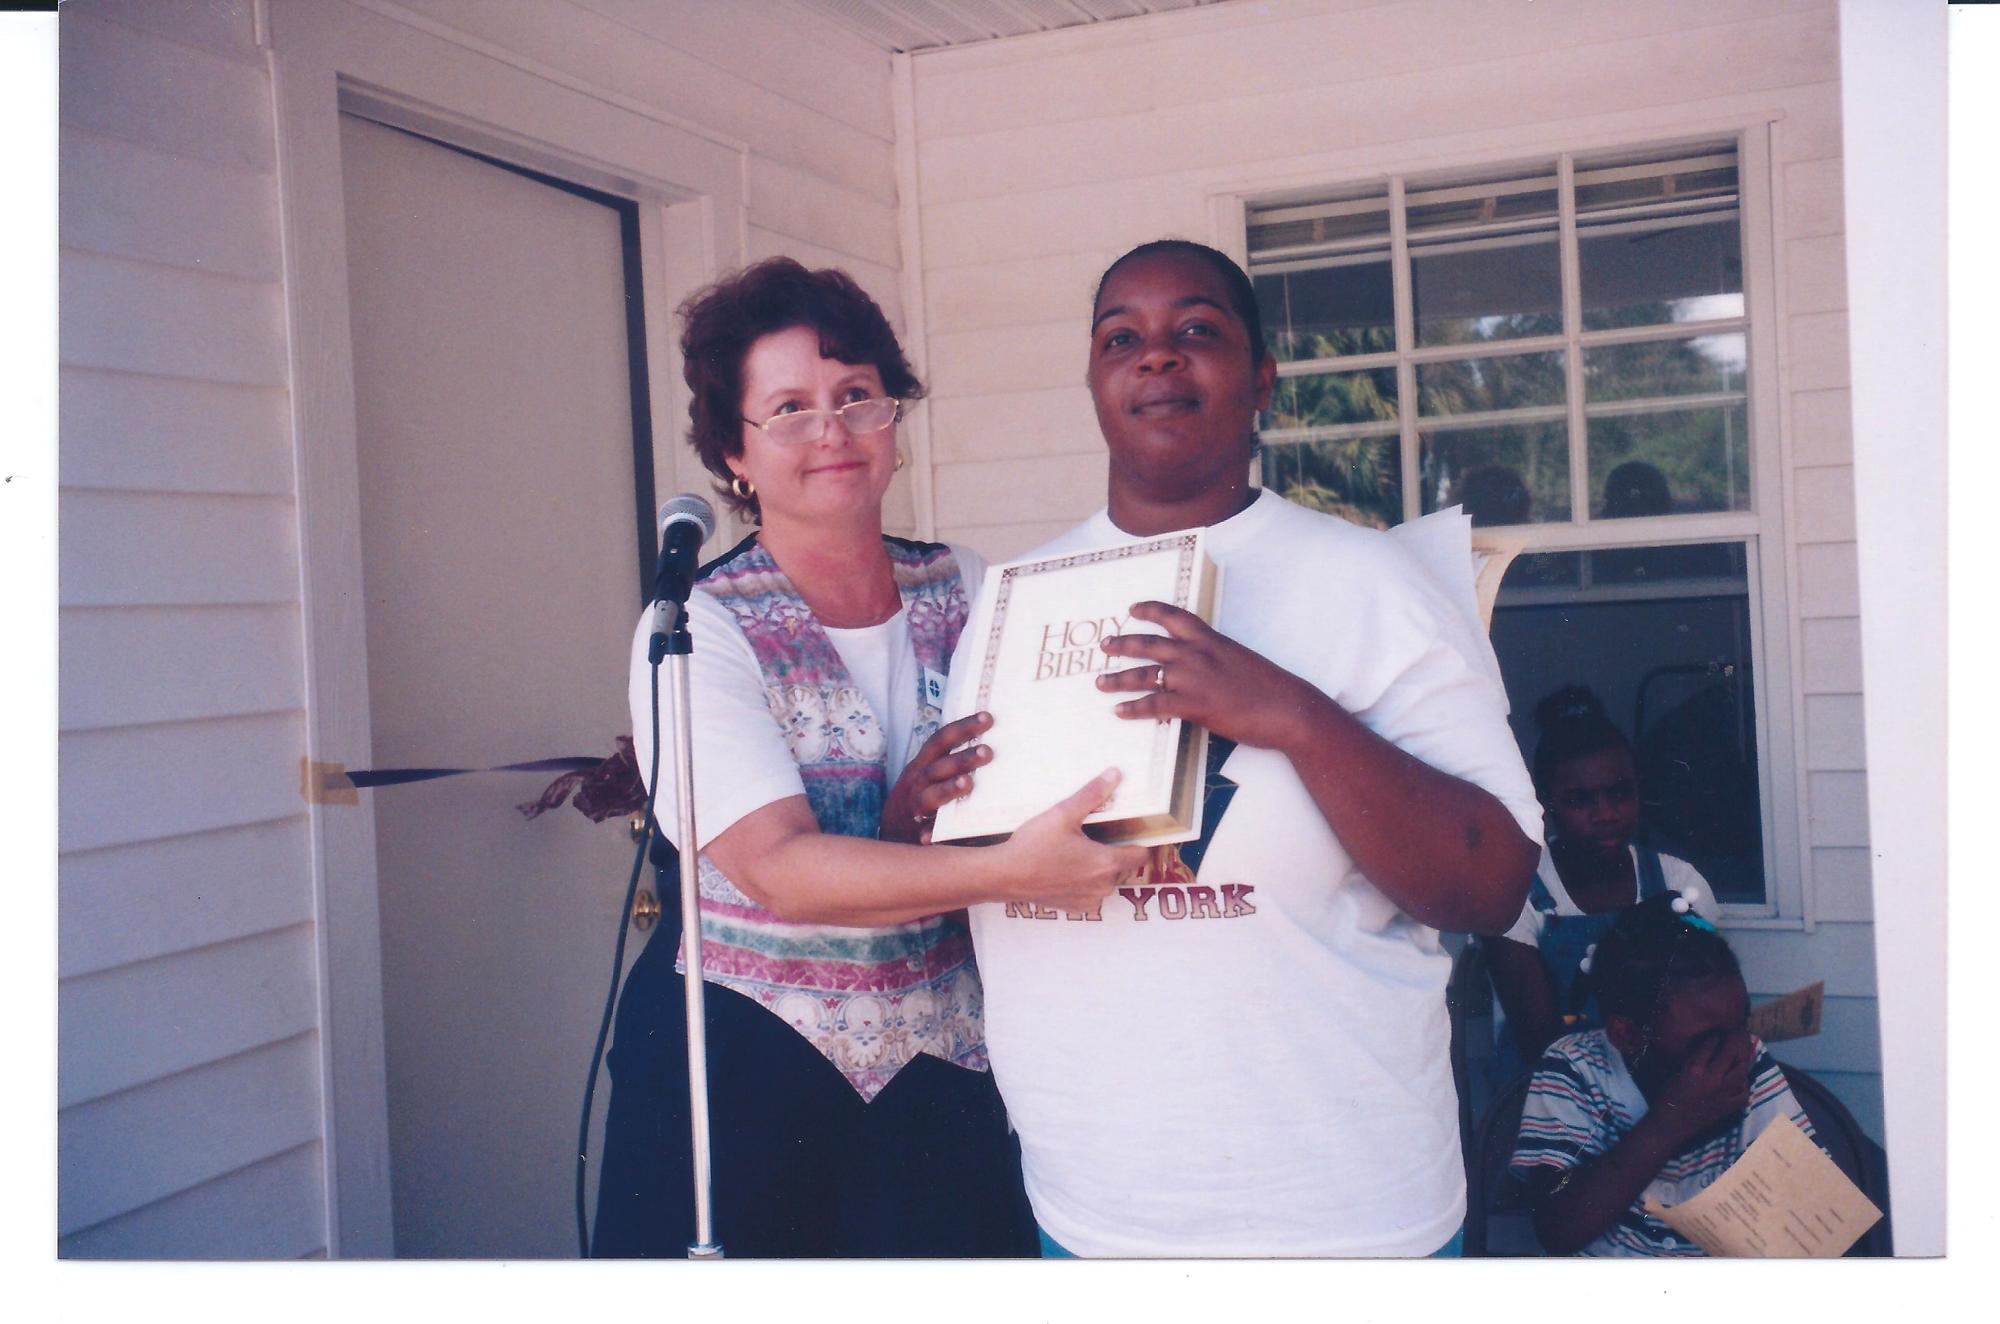 Jackie Reynolds received a Bible from Anne Walding at the ribbon-cutting for her new Habitat home in 1997.